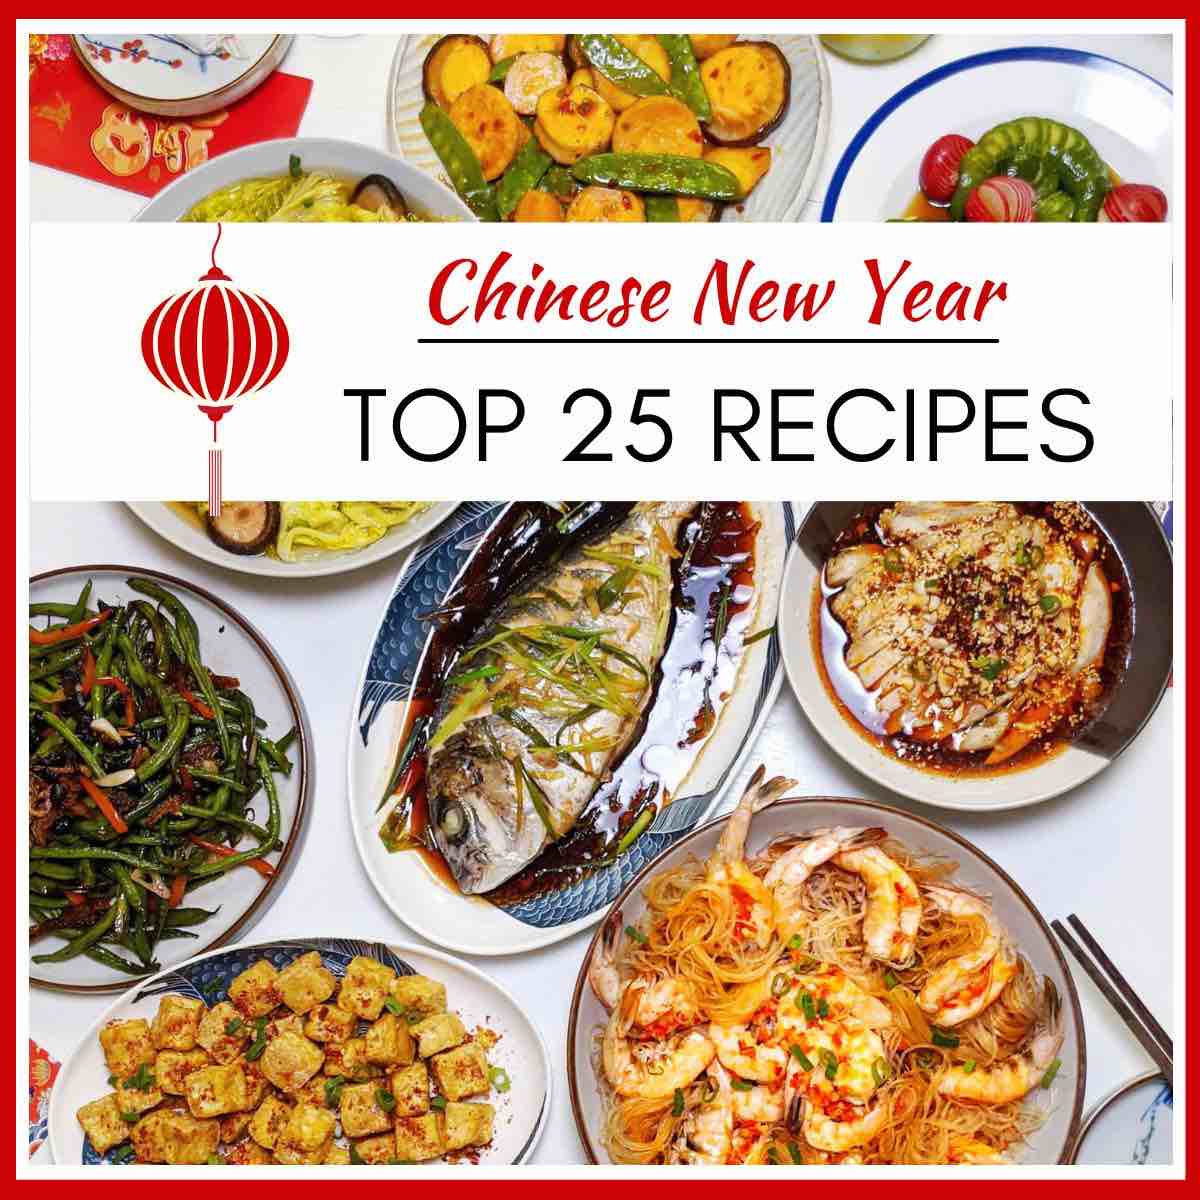 multiple dishes on a table with overlay text that says Chinese new year top 25 recipes